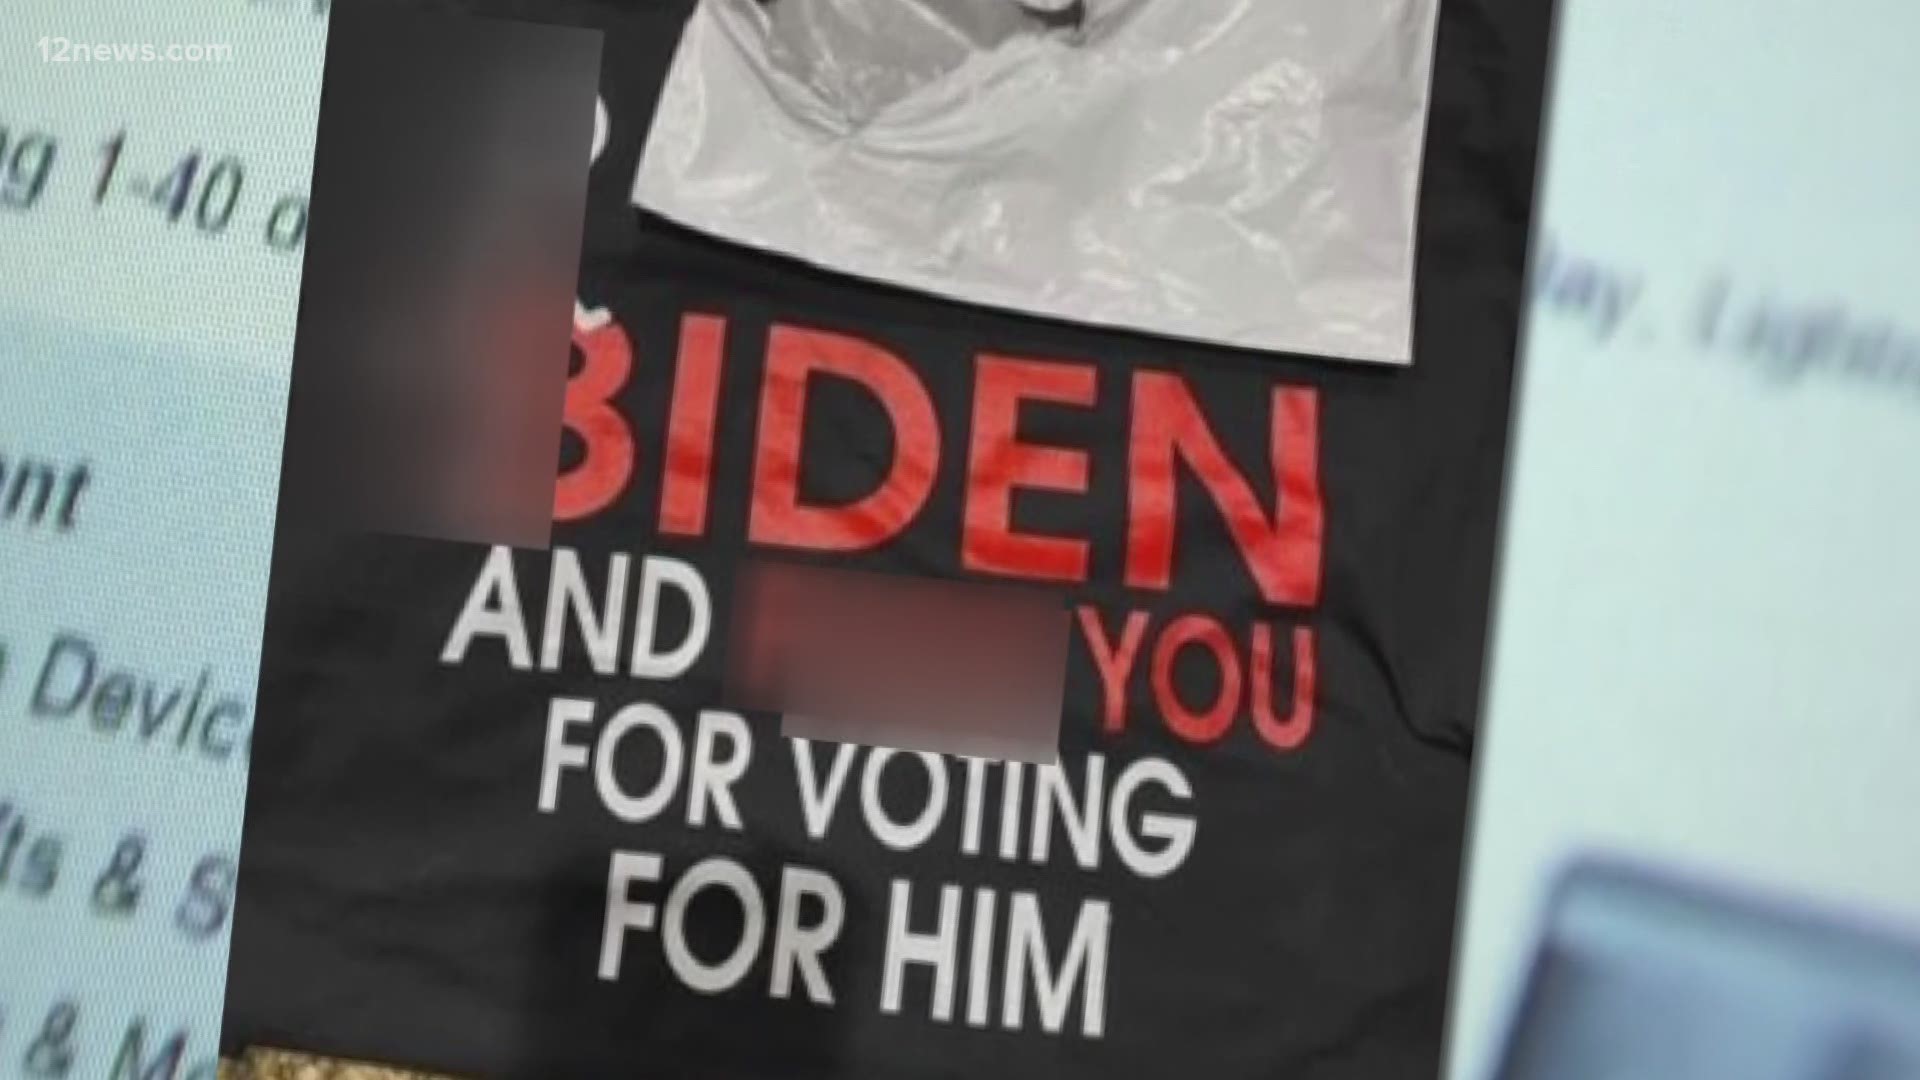 A Gilbert woman ordered a shirt to honor Vice President-elect Kamala Harris, but she says what was delivered instead was an obscenity-laced anti-Biden shirt.